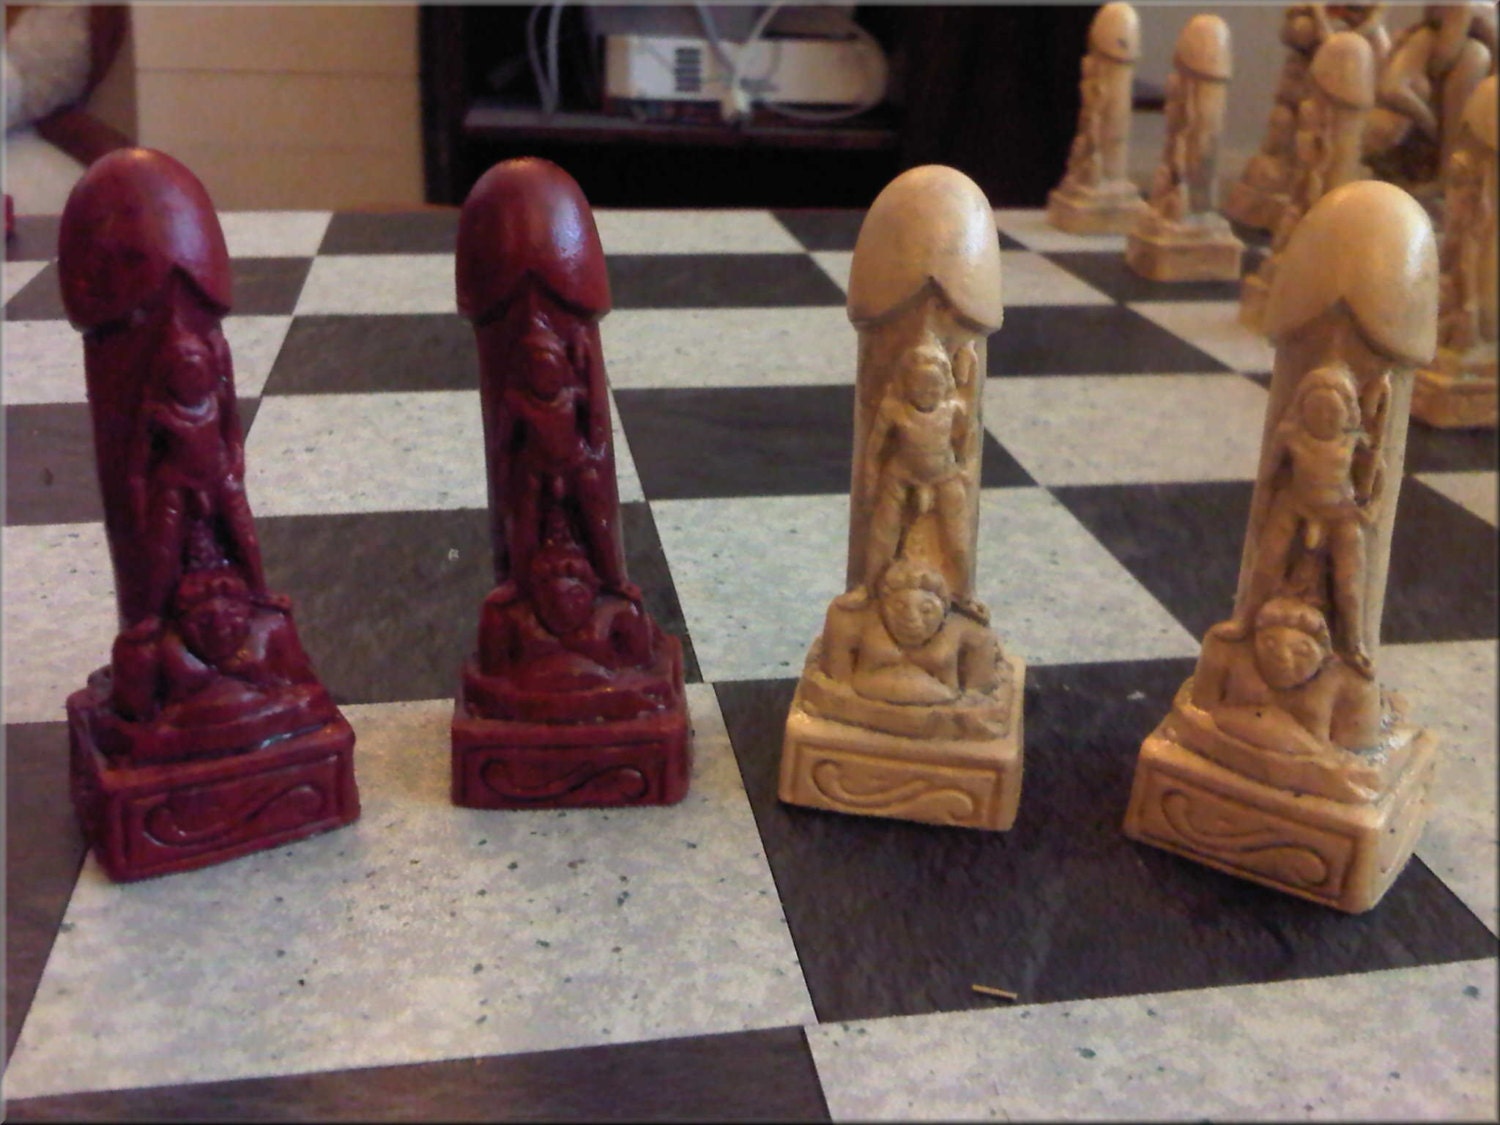 Adult Erotic Sex Themed Kama Sutra Chess Set With Two Extra